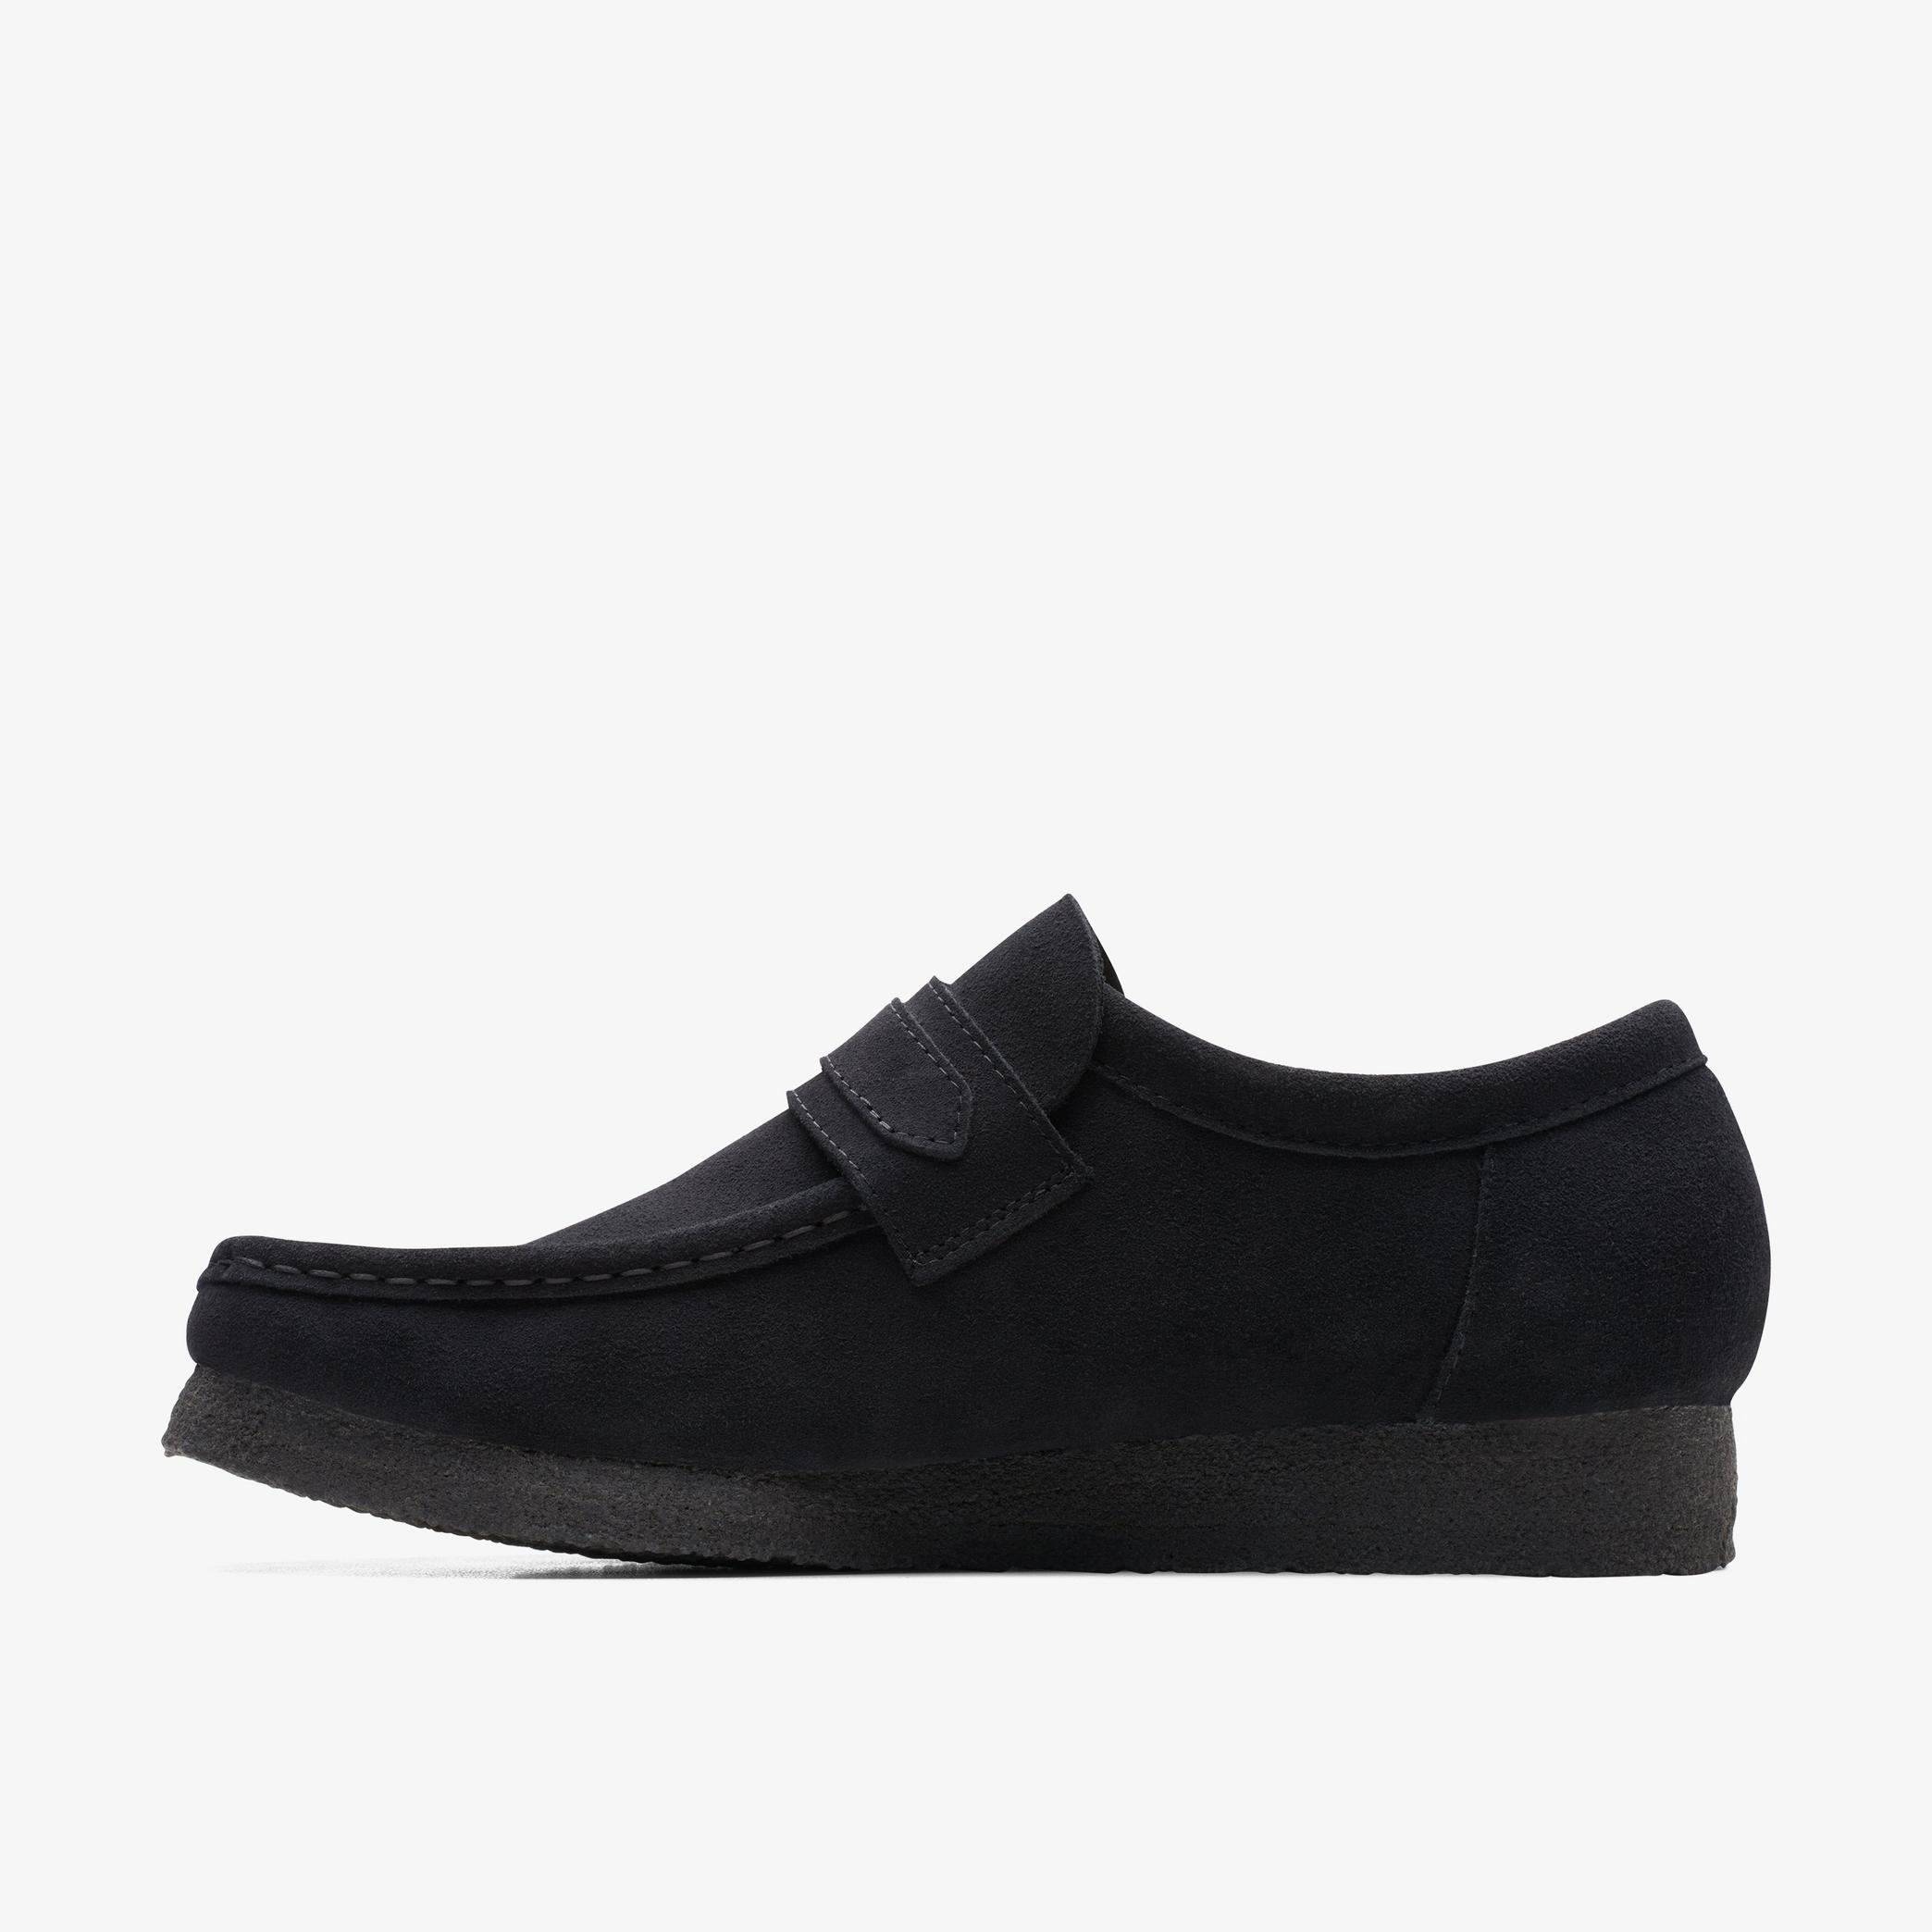 Wallabee Loafer Black Suede Loafers, view 2 of 6